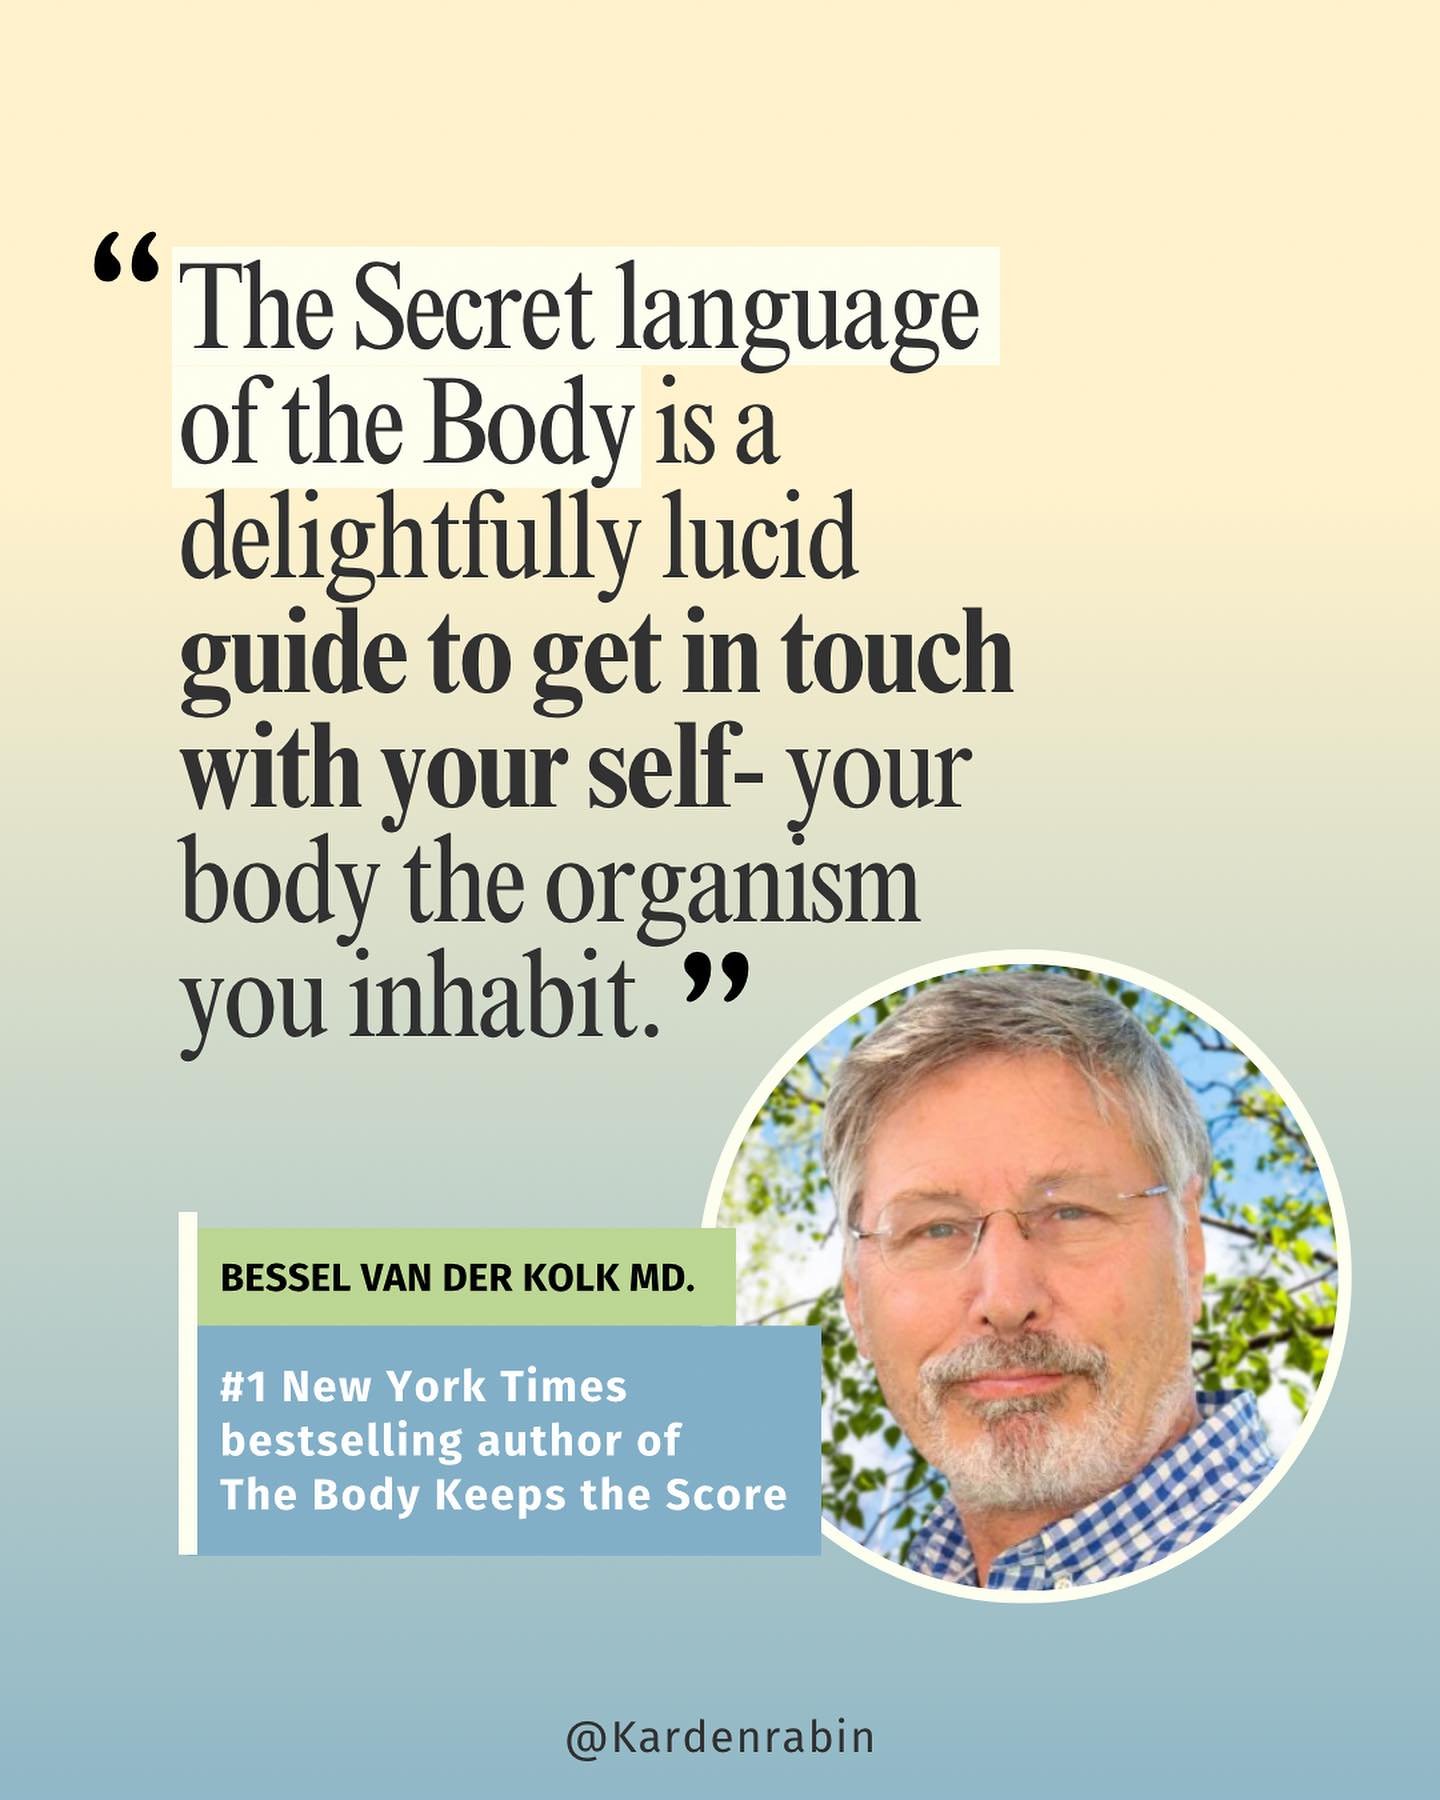 I believe in fate. There have been too many wildly improbable synchronicities in my life to believe otherwise.
.
Five years ago, a month after having my mind blown and life path forever altered by reading Bessel Van der Kolk&rsquo;s The Body Keeps th